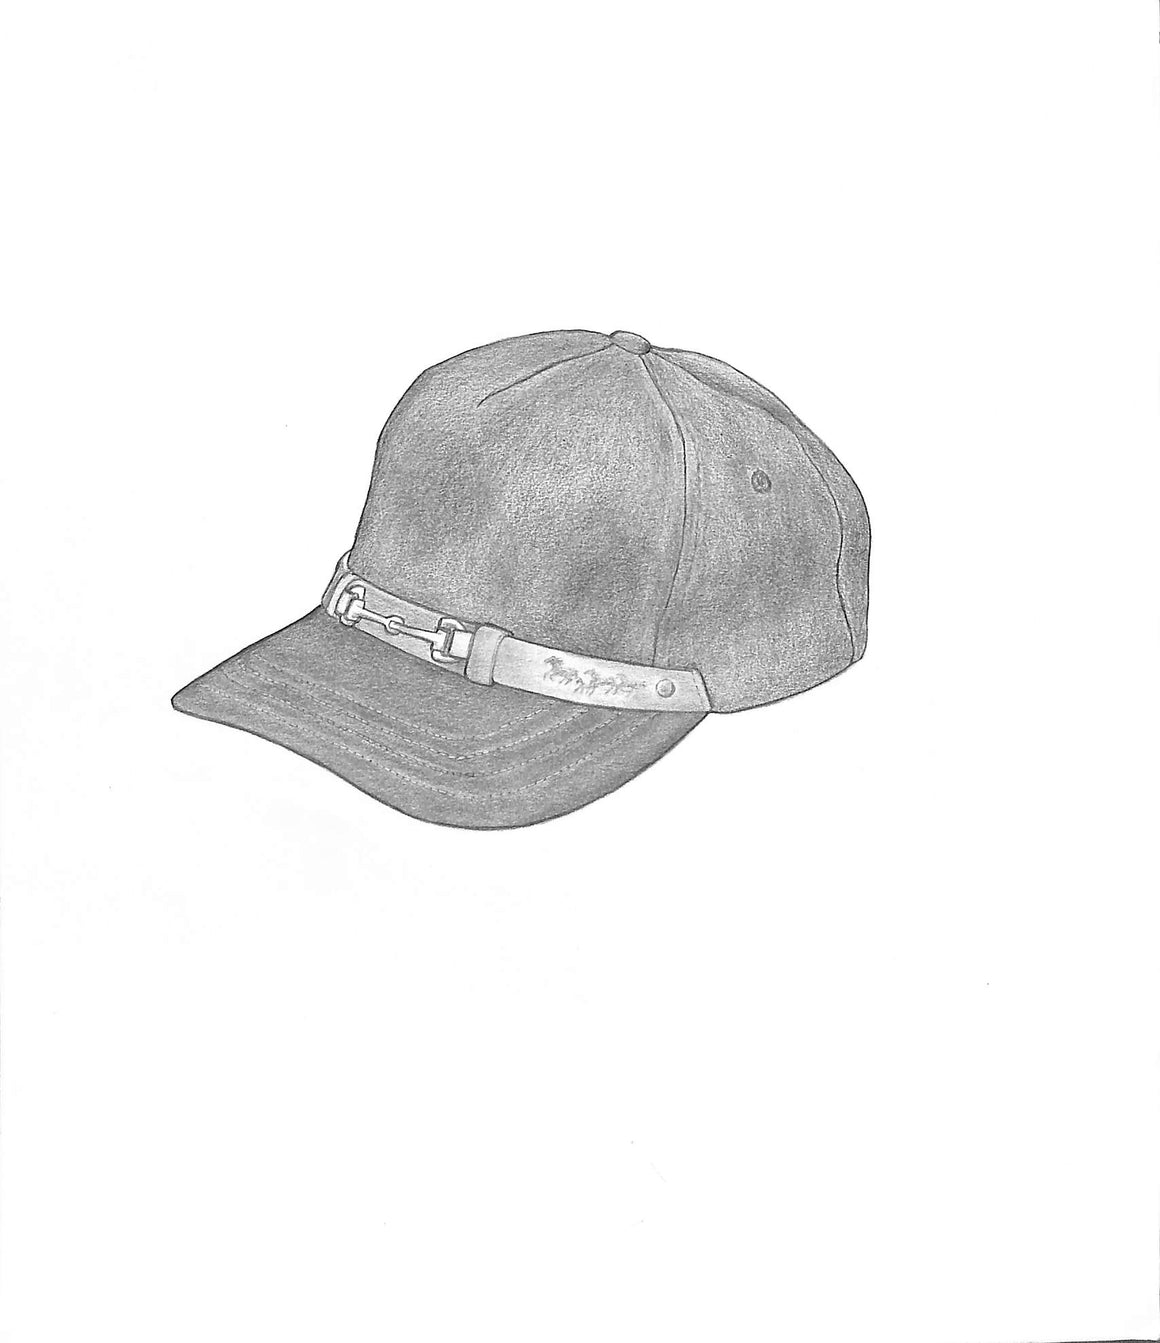 Riding Cap 2002 Graphite Drawing